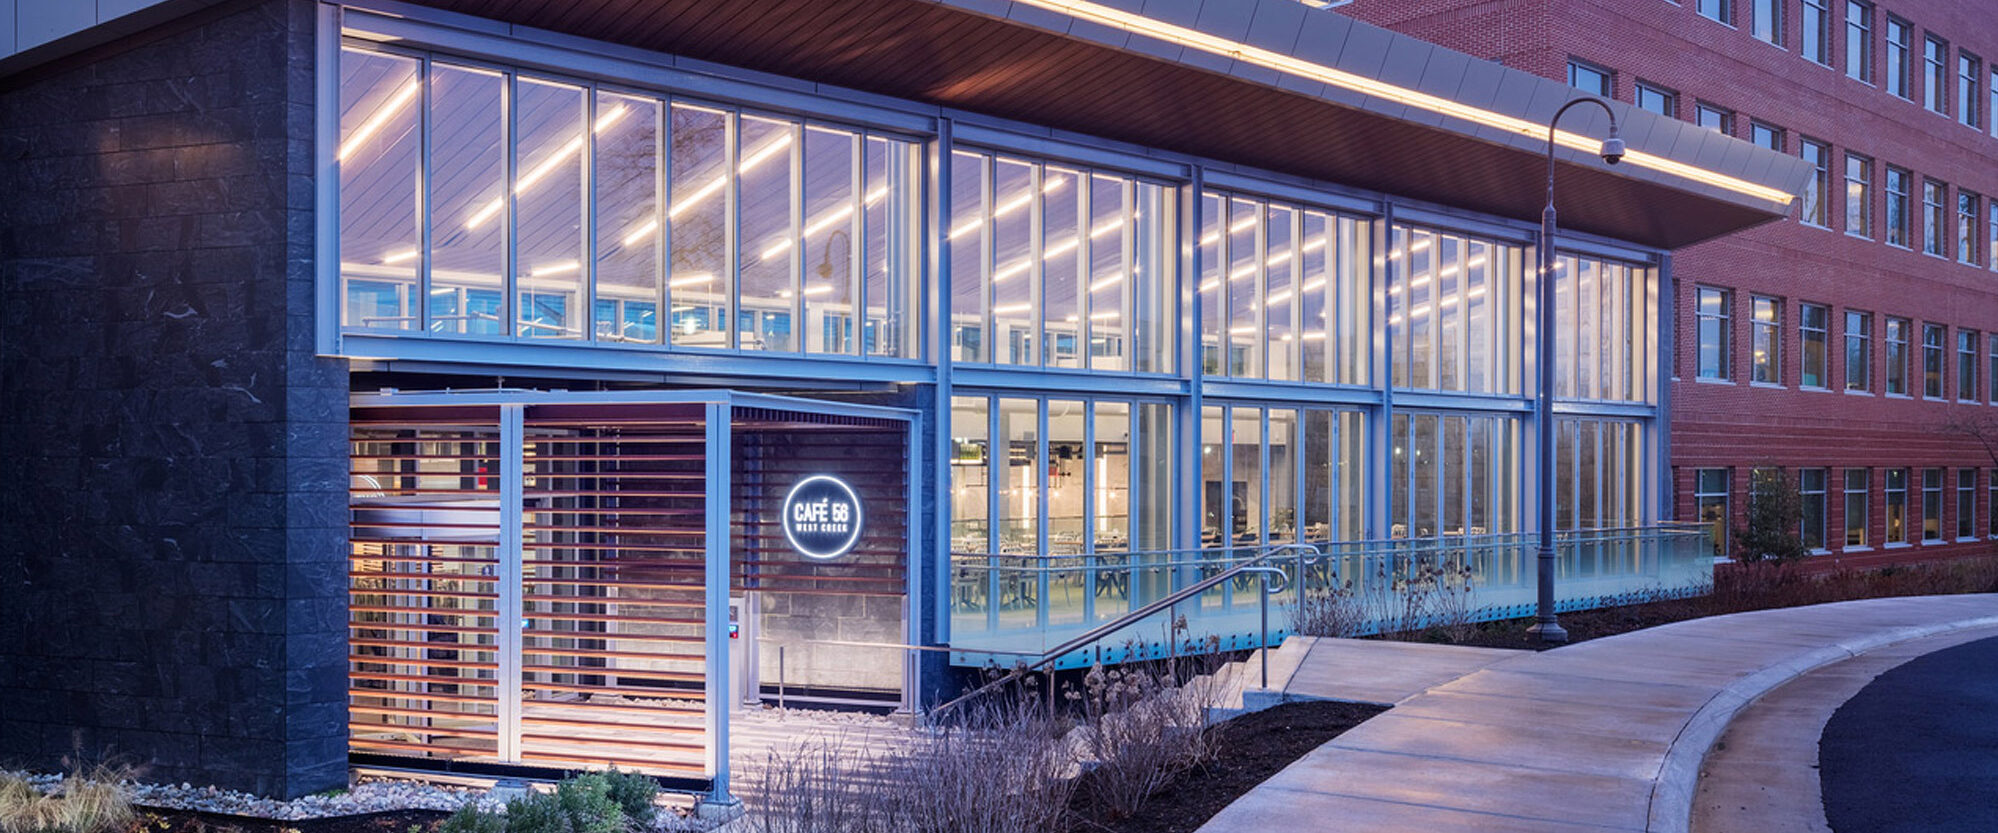 Modern educational building facade at twilight featuring a glass-walled walkway, illuminated interior spaces, sleek metal roof accents, and warm wooden cladding on a revolving entrance door area. The design integrates clear and opaque materials harmoniously, showcasing contemporary architectural style.